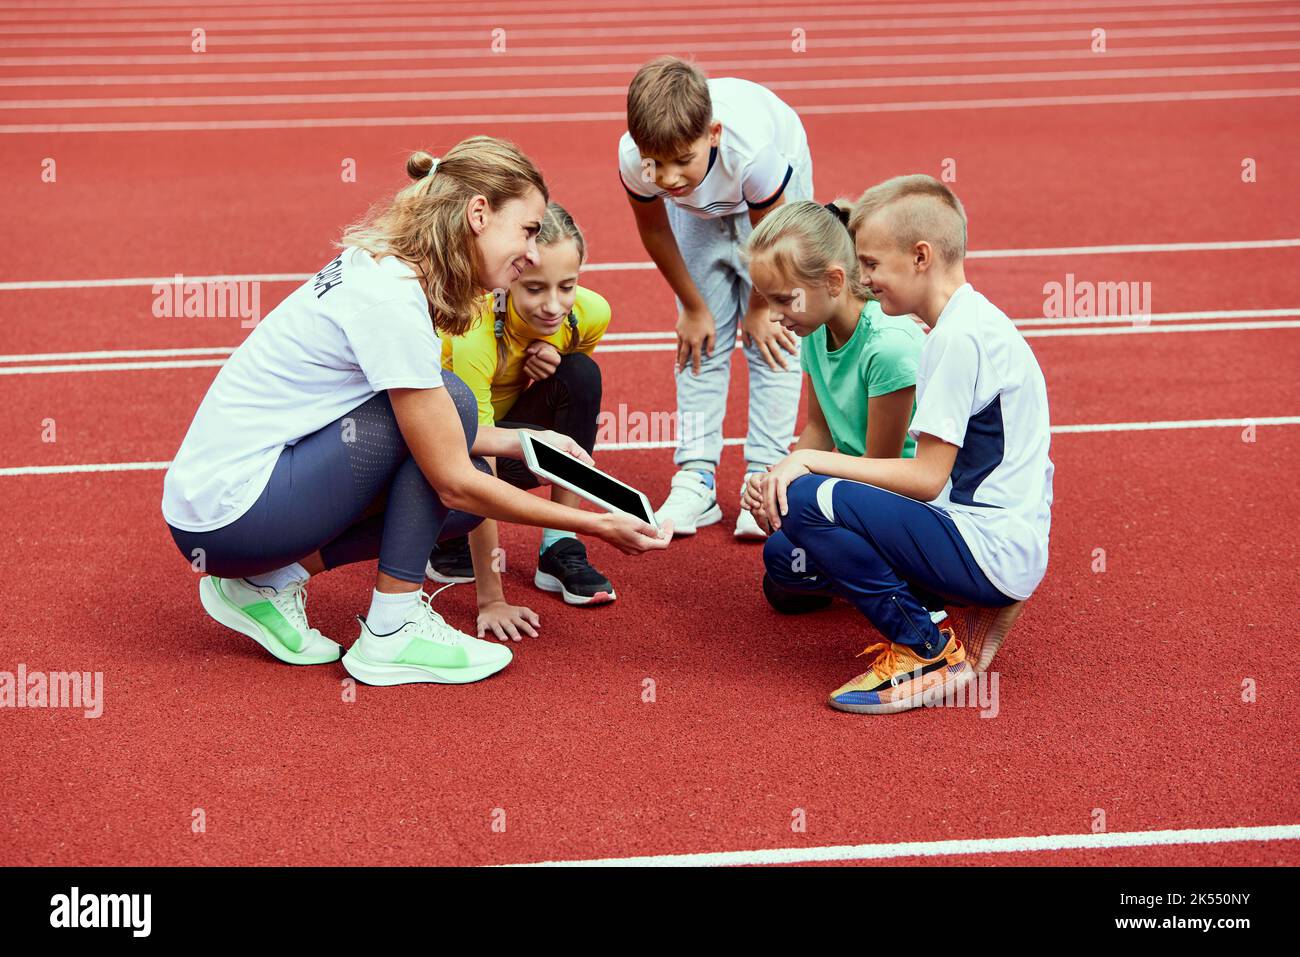 Female coach training athletes. Group of children before running on treadmill at the stadium. Concept of sport, achievements, studying, goals, skills Stock Photo